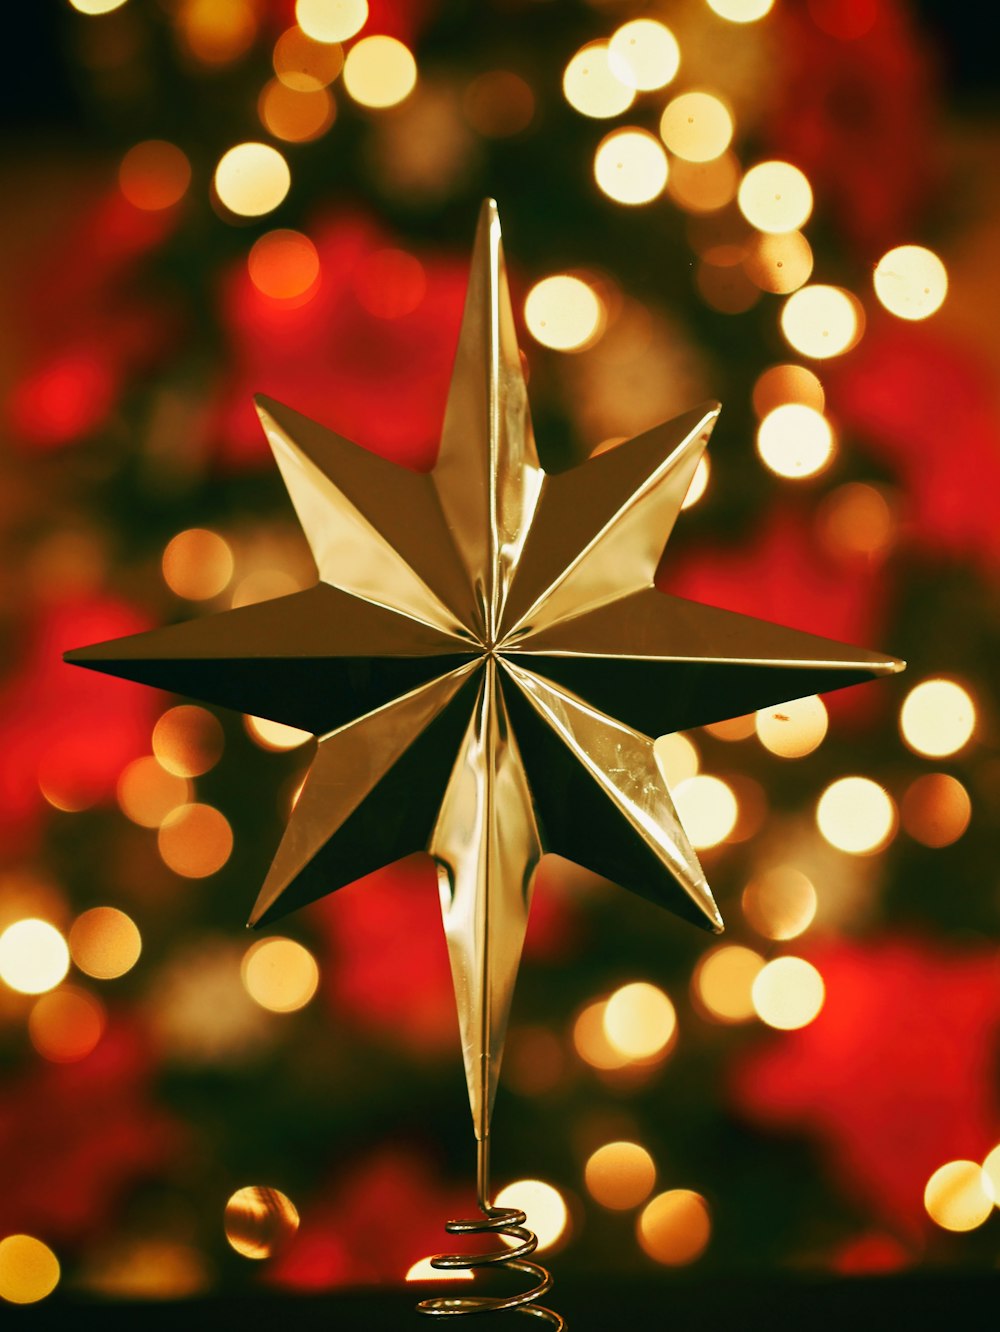 bokeh photography of gold star tree topper